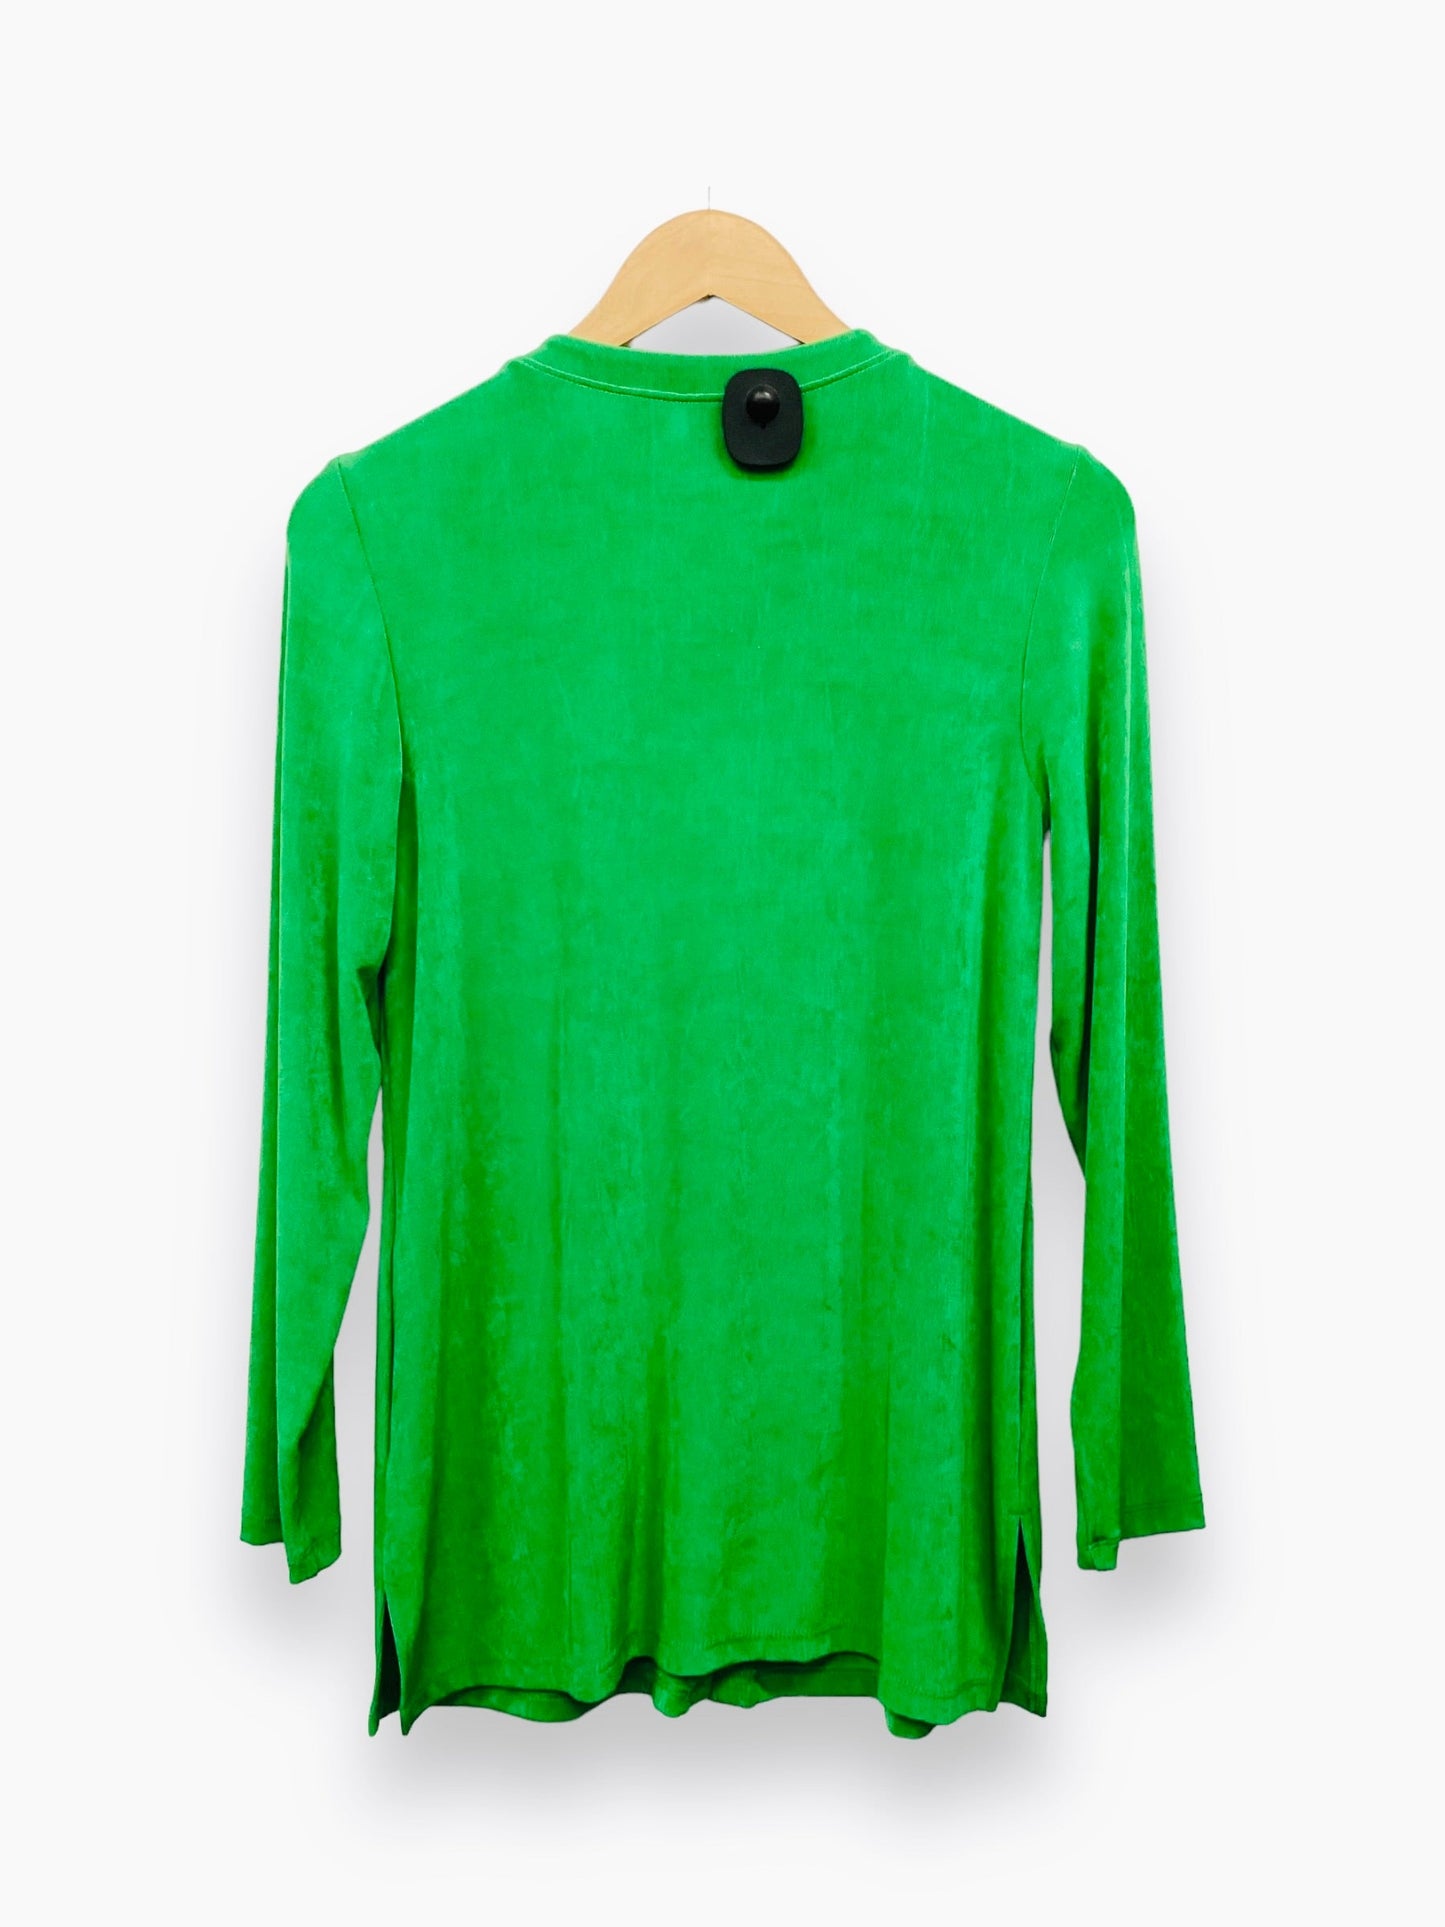 Green Top Long Sleeve Chicos, Size S